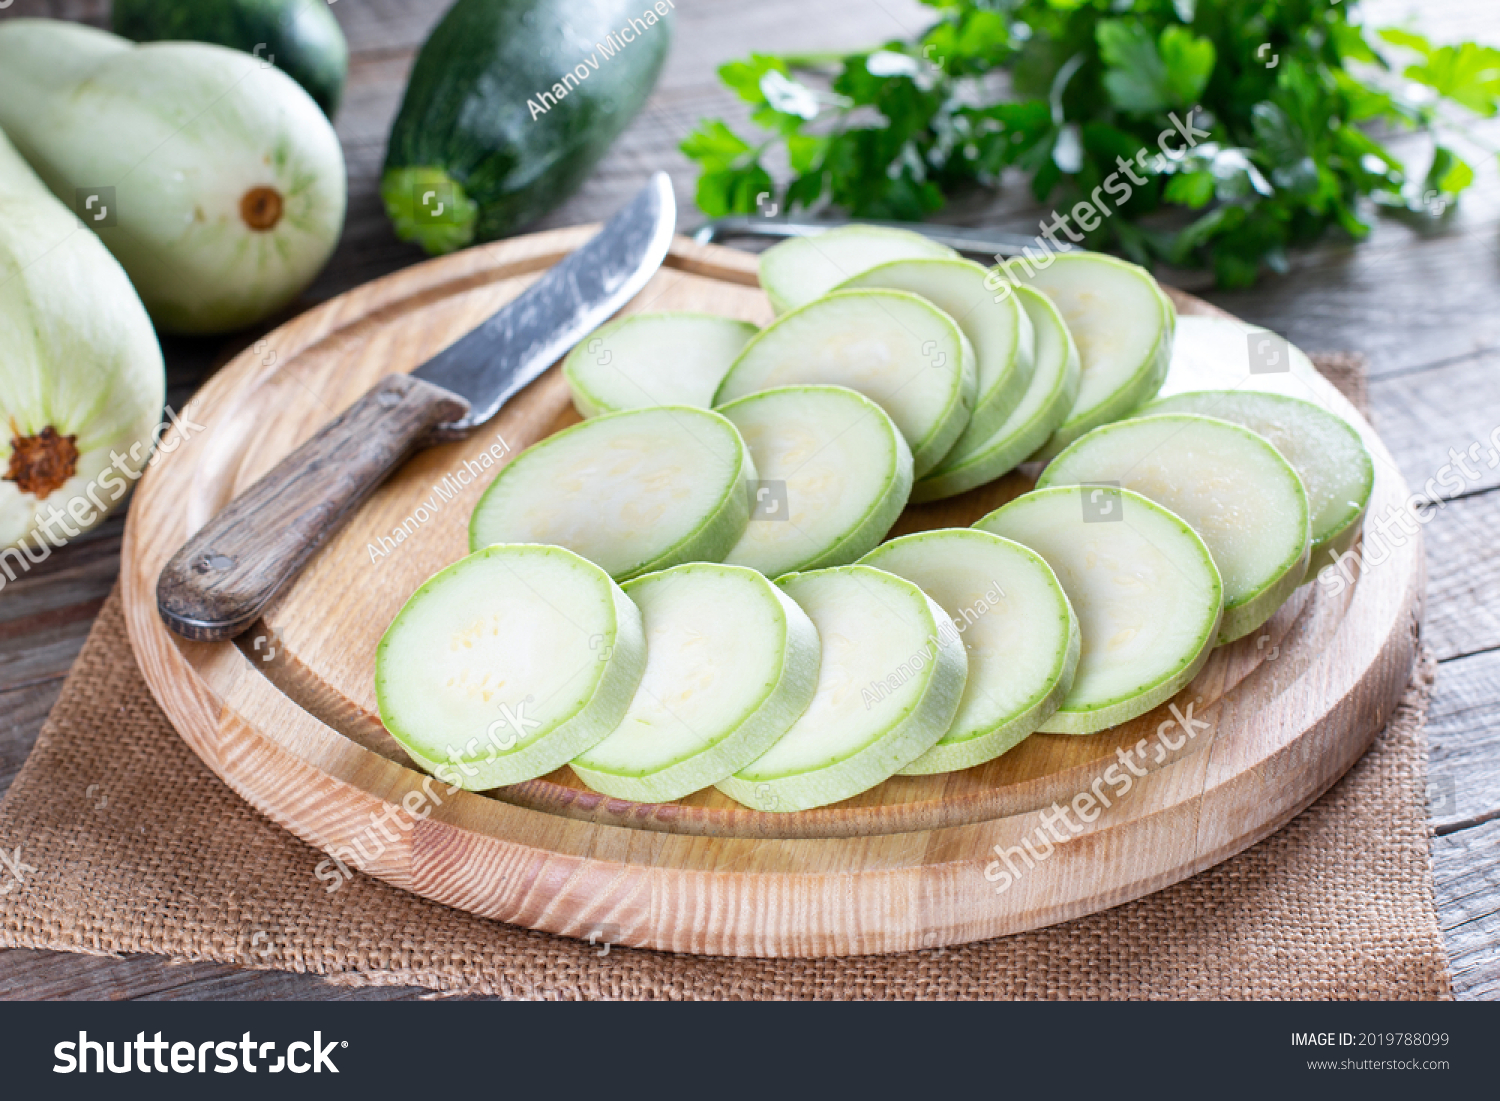 Whole and sliced fresh zucchini on wooden table. Healthy vegetarian ingredient #2019788099